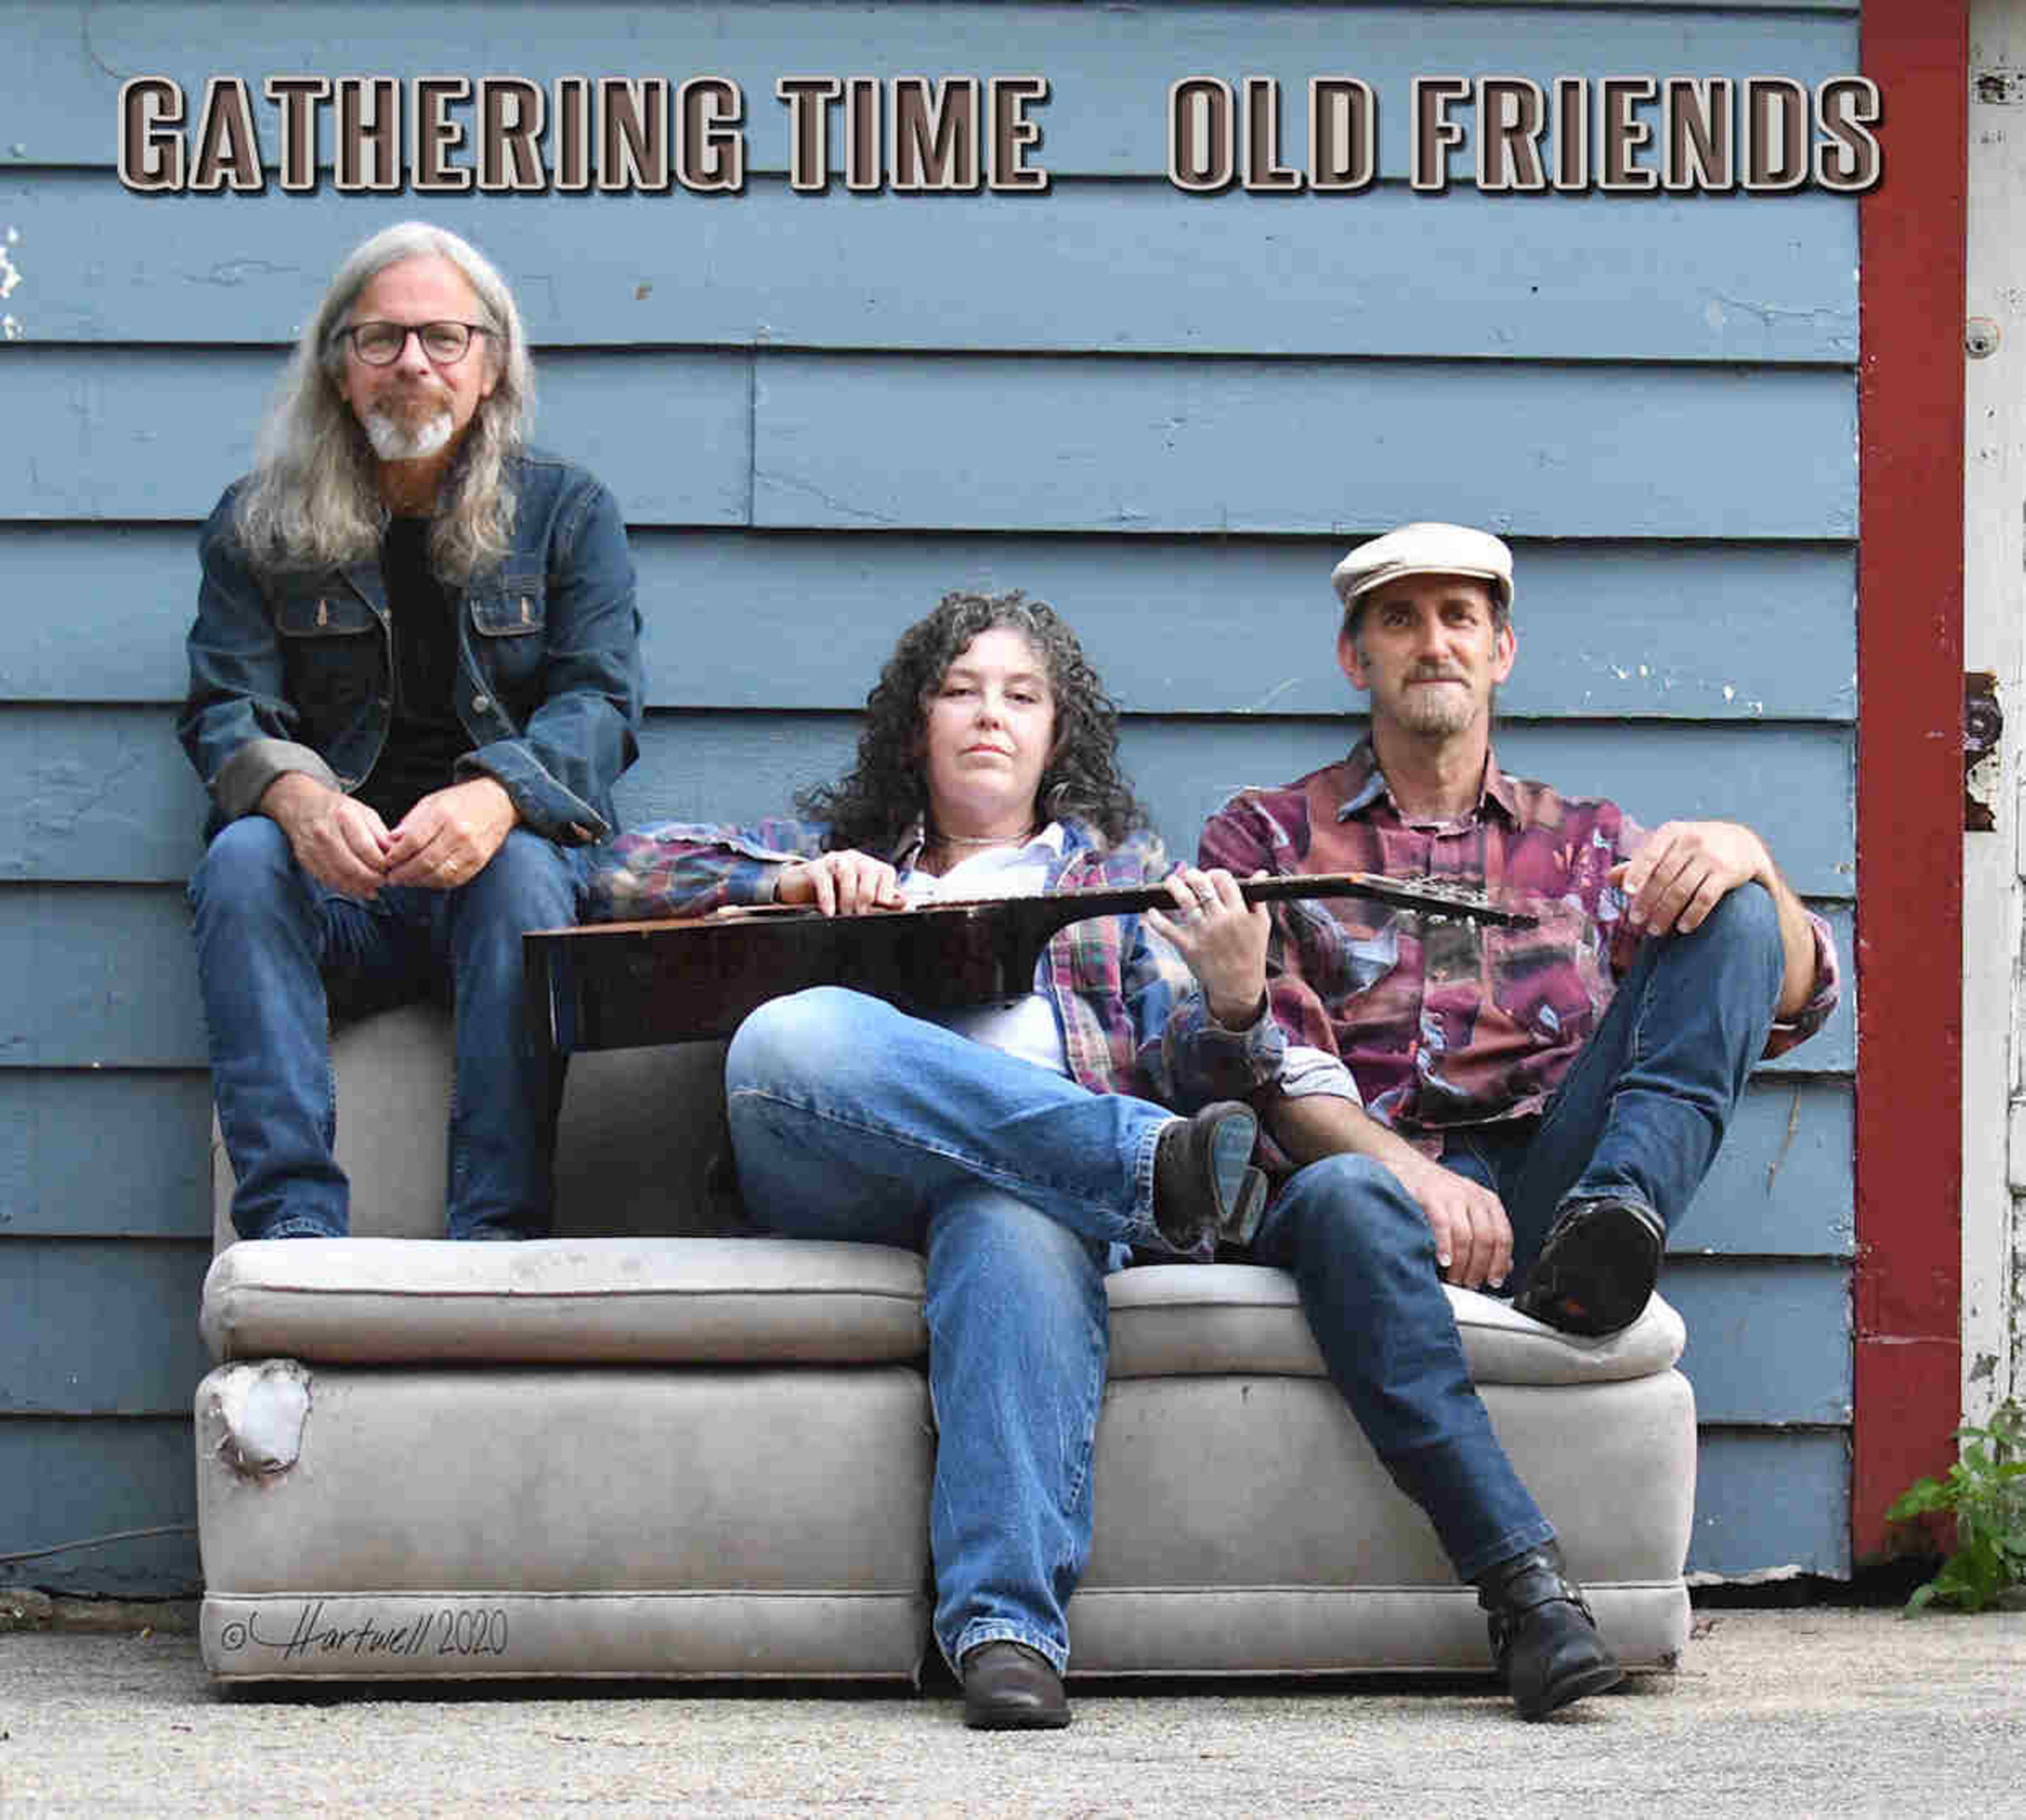 Sounds and Messages of the ‘60s Revisited in New Album by Folk-Rock Trio Gathering Time